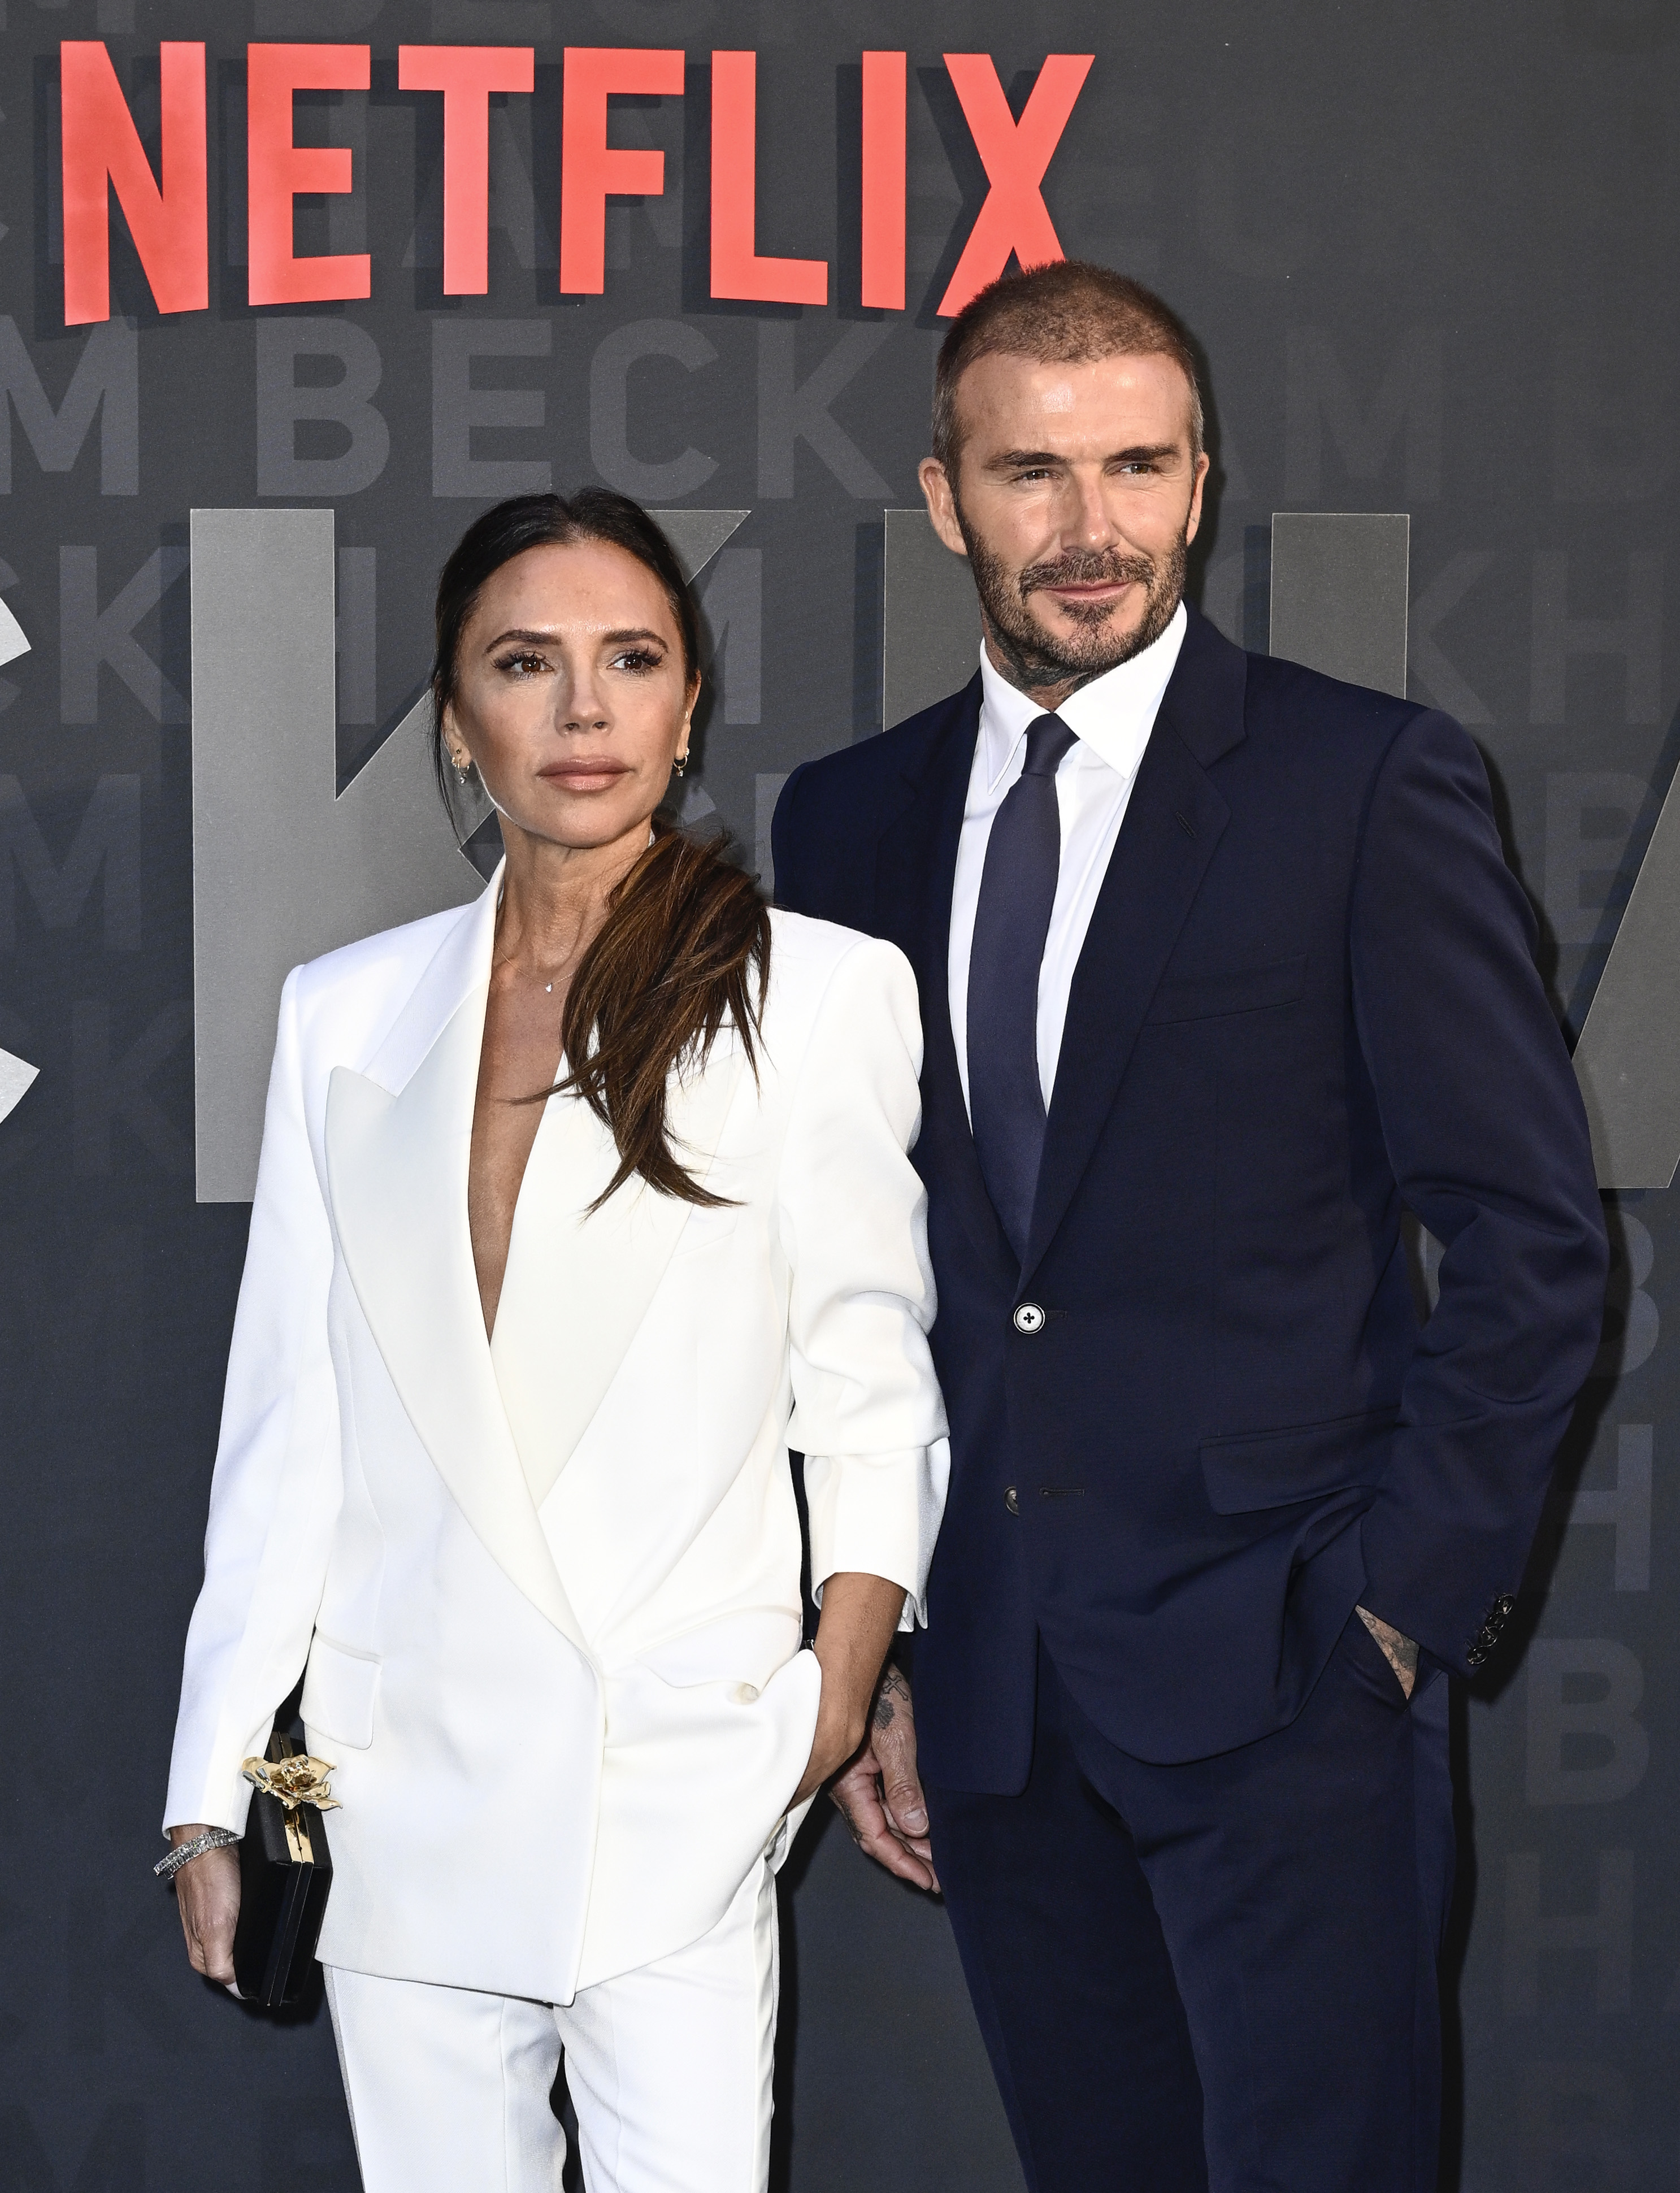 Victoria and David Beckham attend the Netflix 'Beckham' UK Premiere at The Curzon Mayfair in London, England, on October 3, 2023. | Source: Getty Images